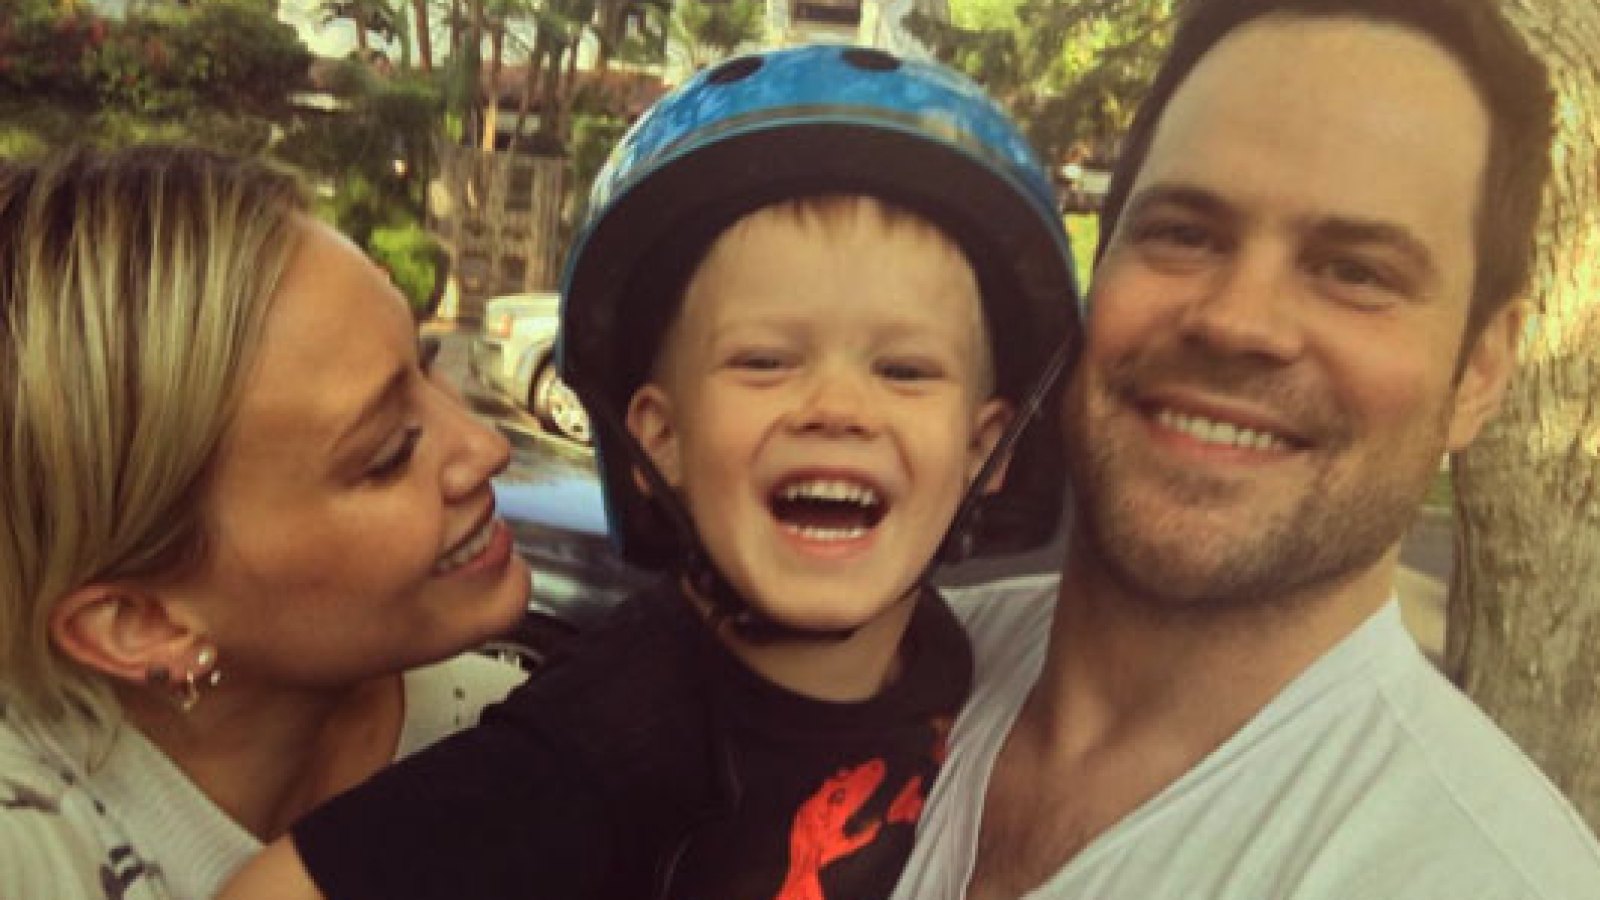 Hilary Duff and Mike Comrie united to celebrate Luca's birthday